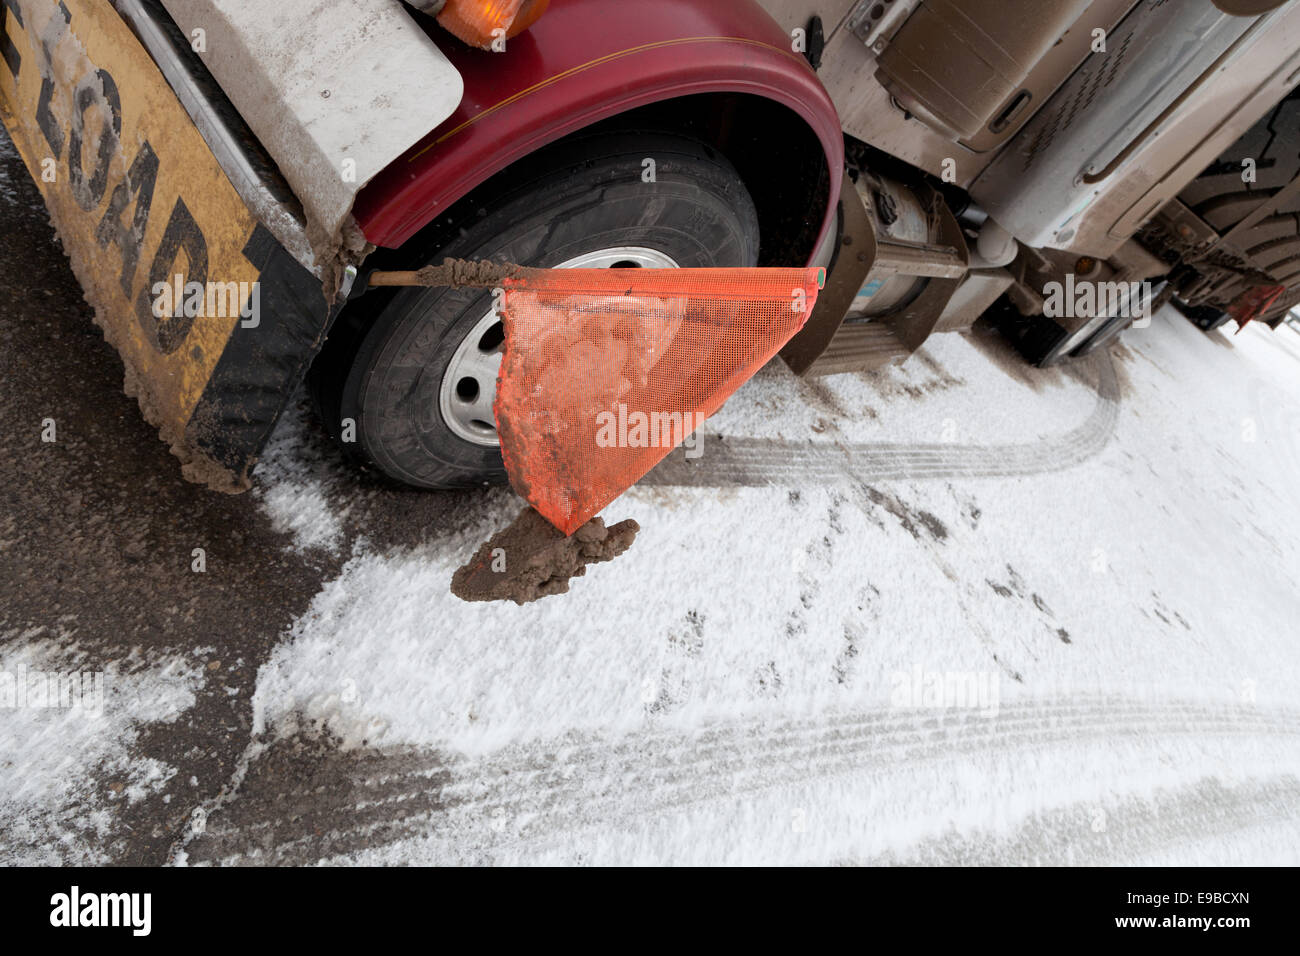 peterbilt 379 Semi trailer with a flatdeck oversize load of huge giant large mining tyres with warning flags snow and ice covered in pullout winter Stock Photo